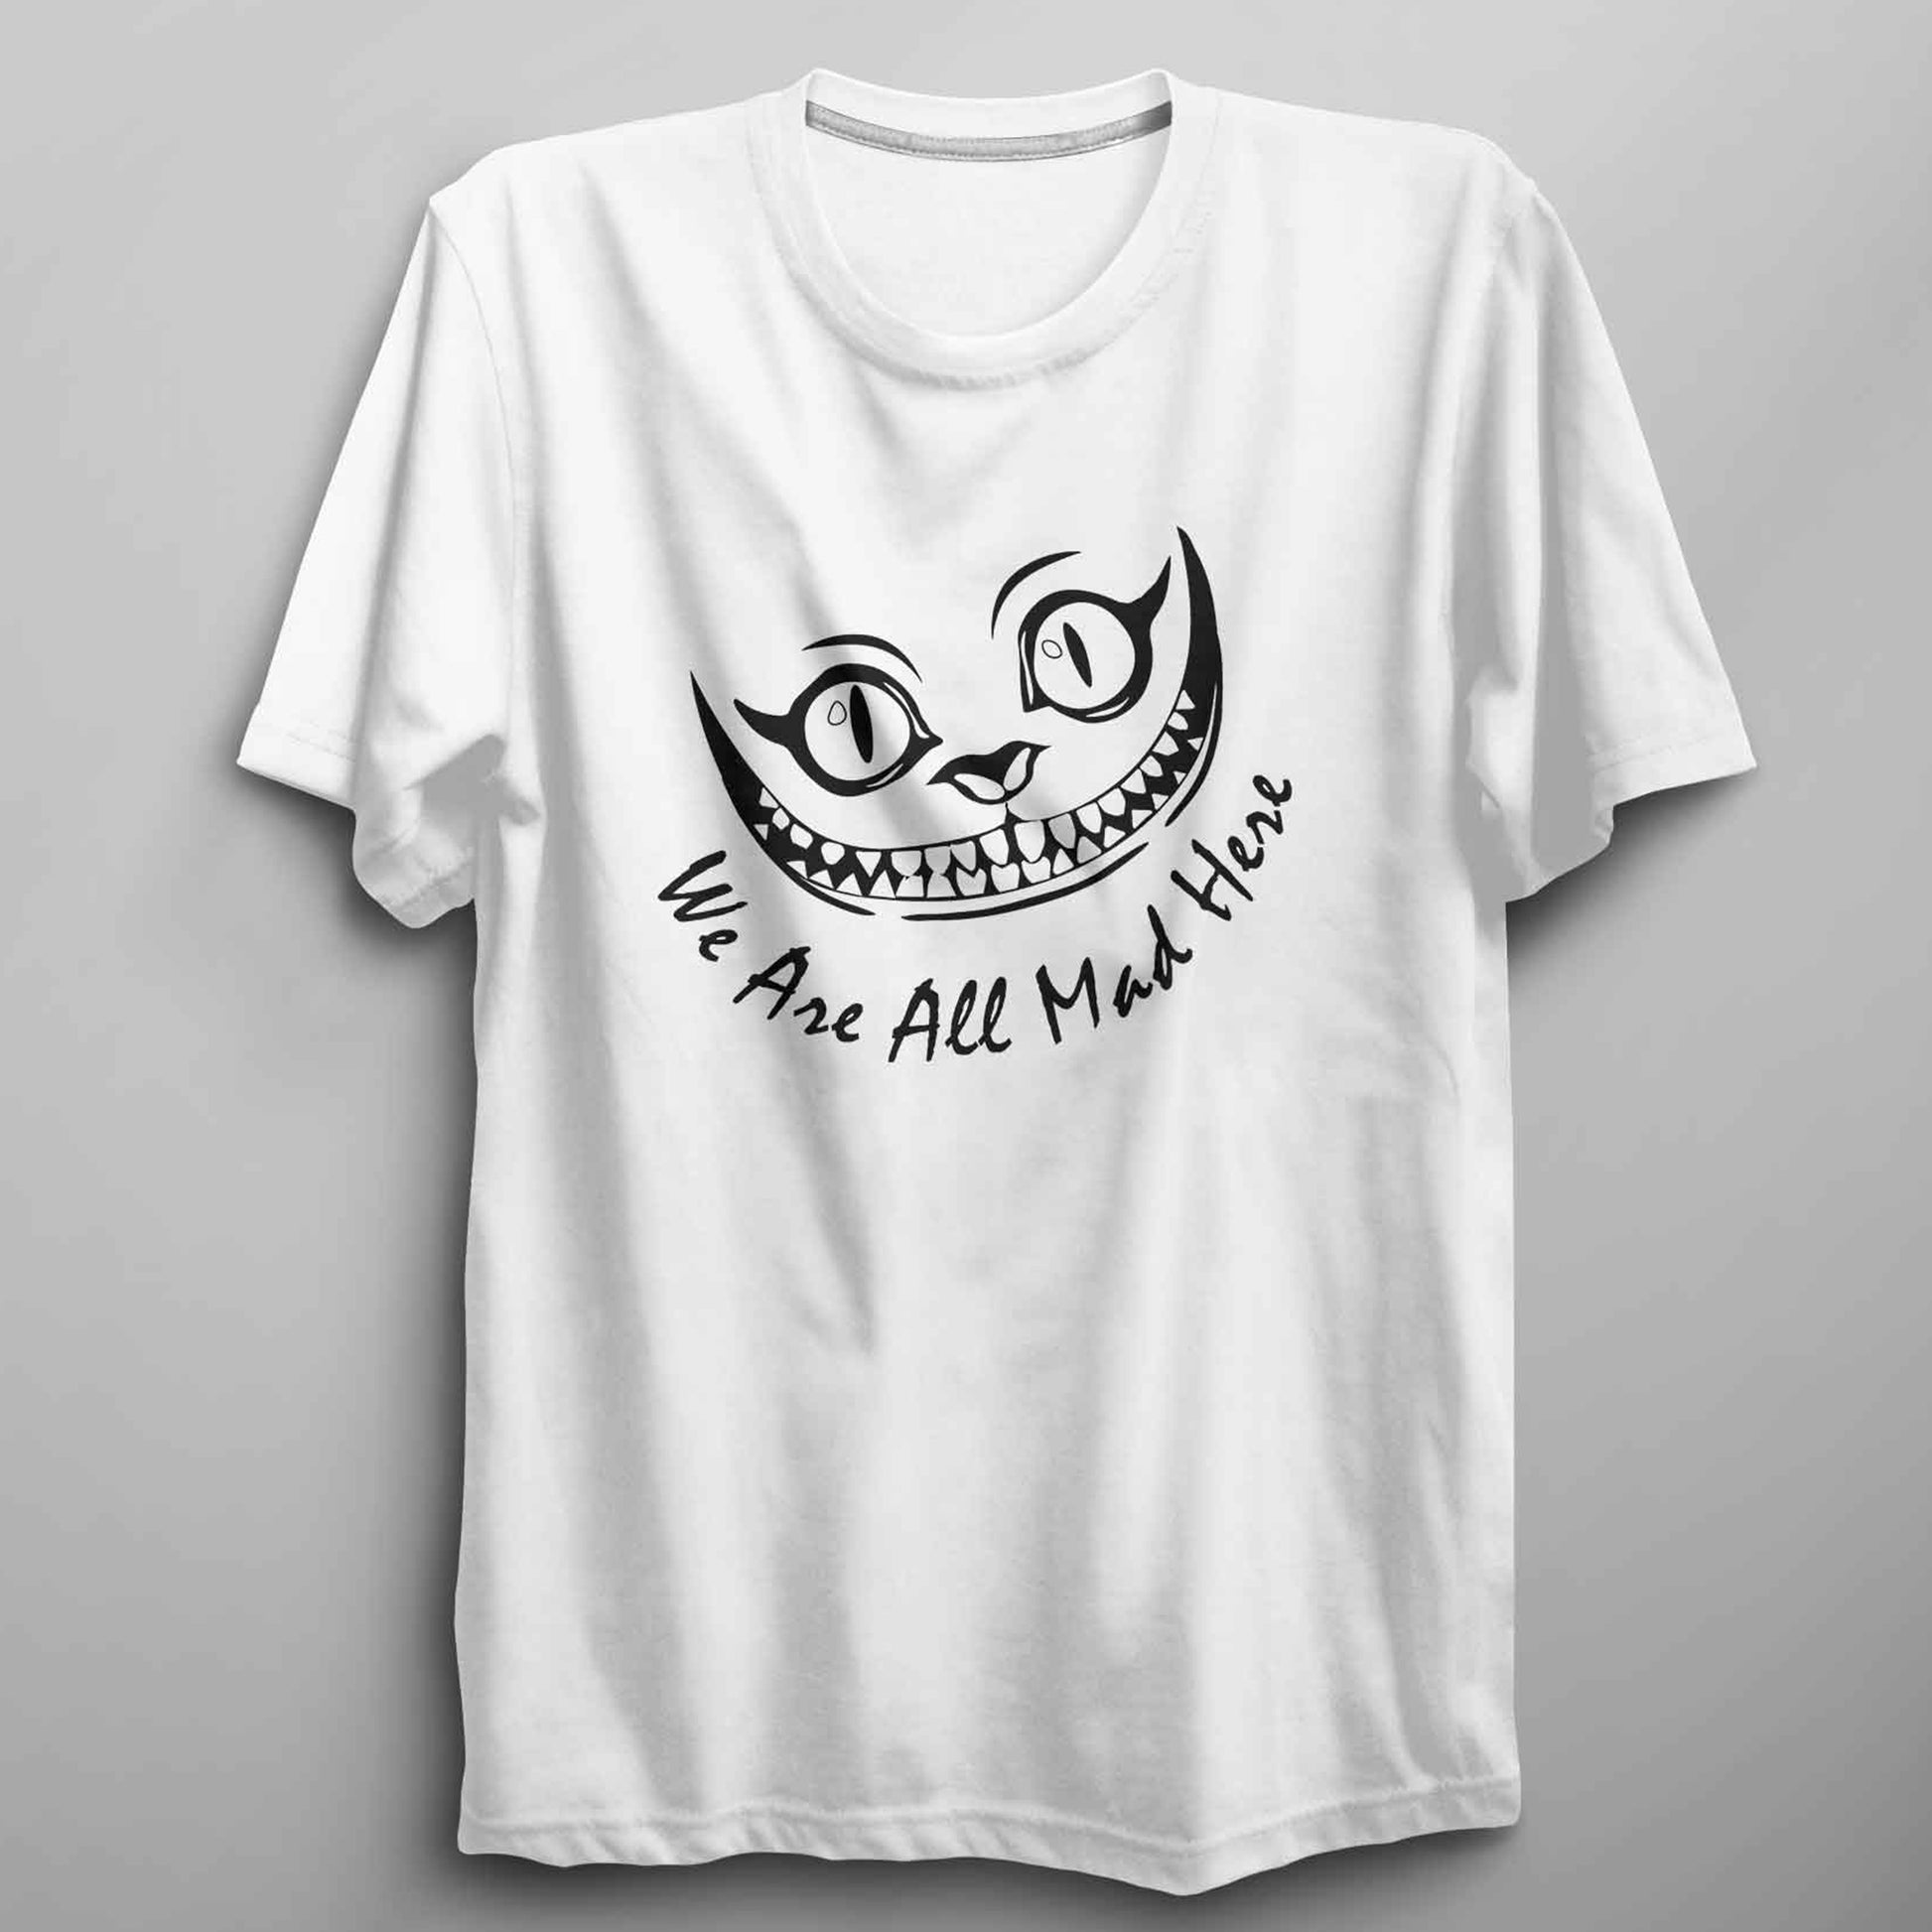 Cheshire Cat 'We Are All Mad Here' Unisex T Shirt - FLUX DESIGNS